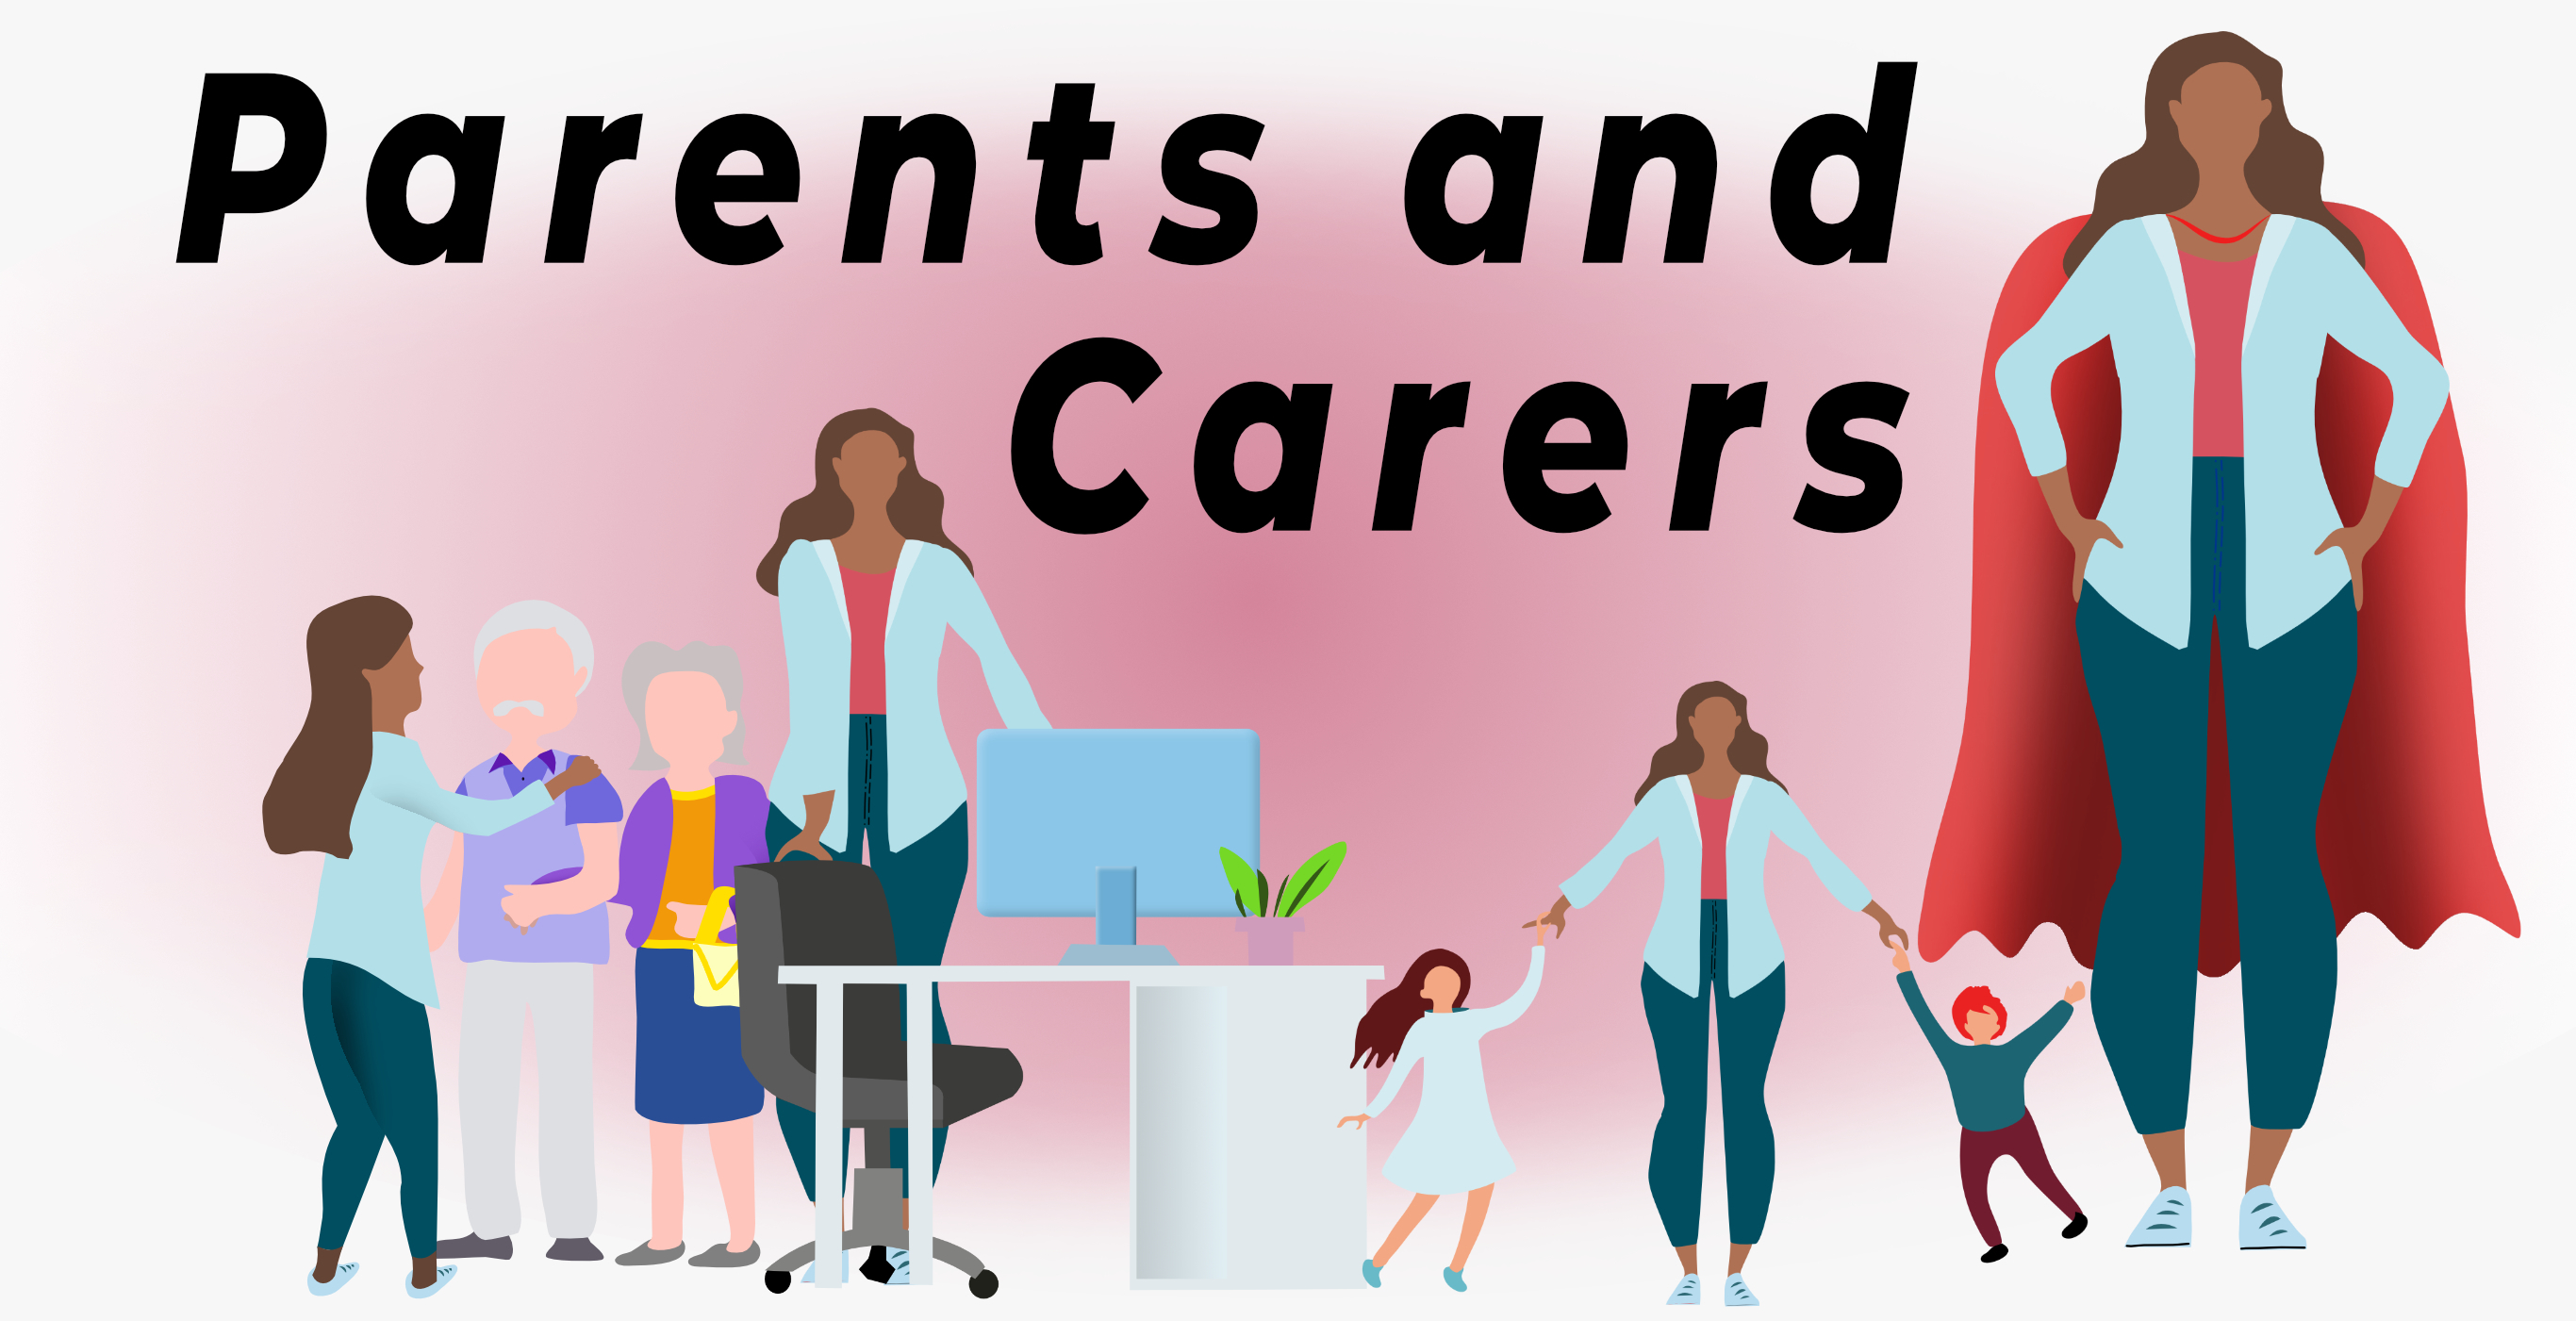 Vector of parents and carers